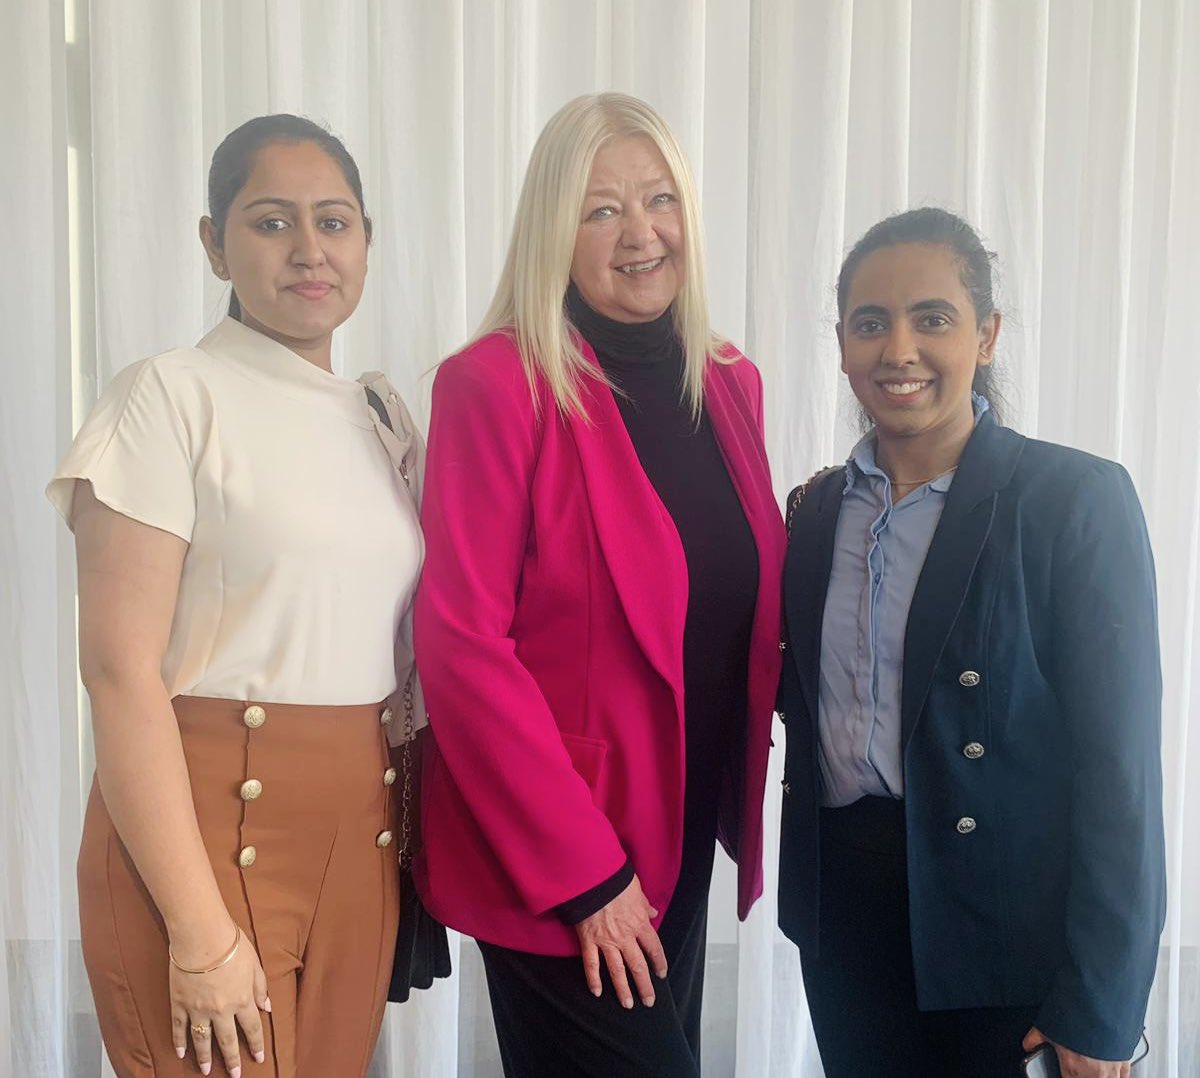 Y Media Corporate Communications Team with President and CEO - HP Canada: Mary Ann Yule During MBOT's Women's Leadership Event.

#ymedia #southasiandaily #hpcanada #mississauga #Mbot #WomenEmpowerment #leadership 
@HPCanada @YudhvirJaswal @MBOTOntario @HP